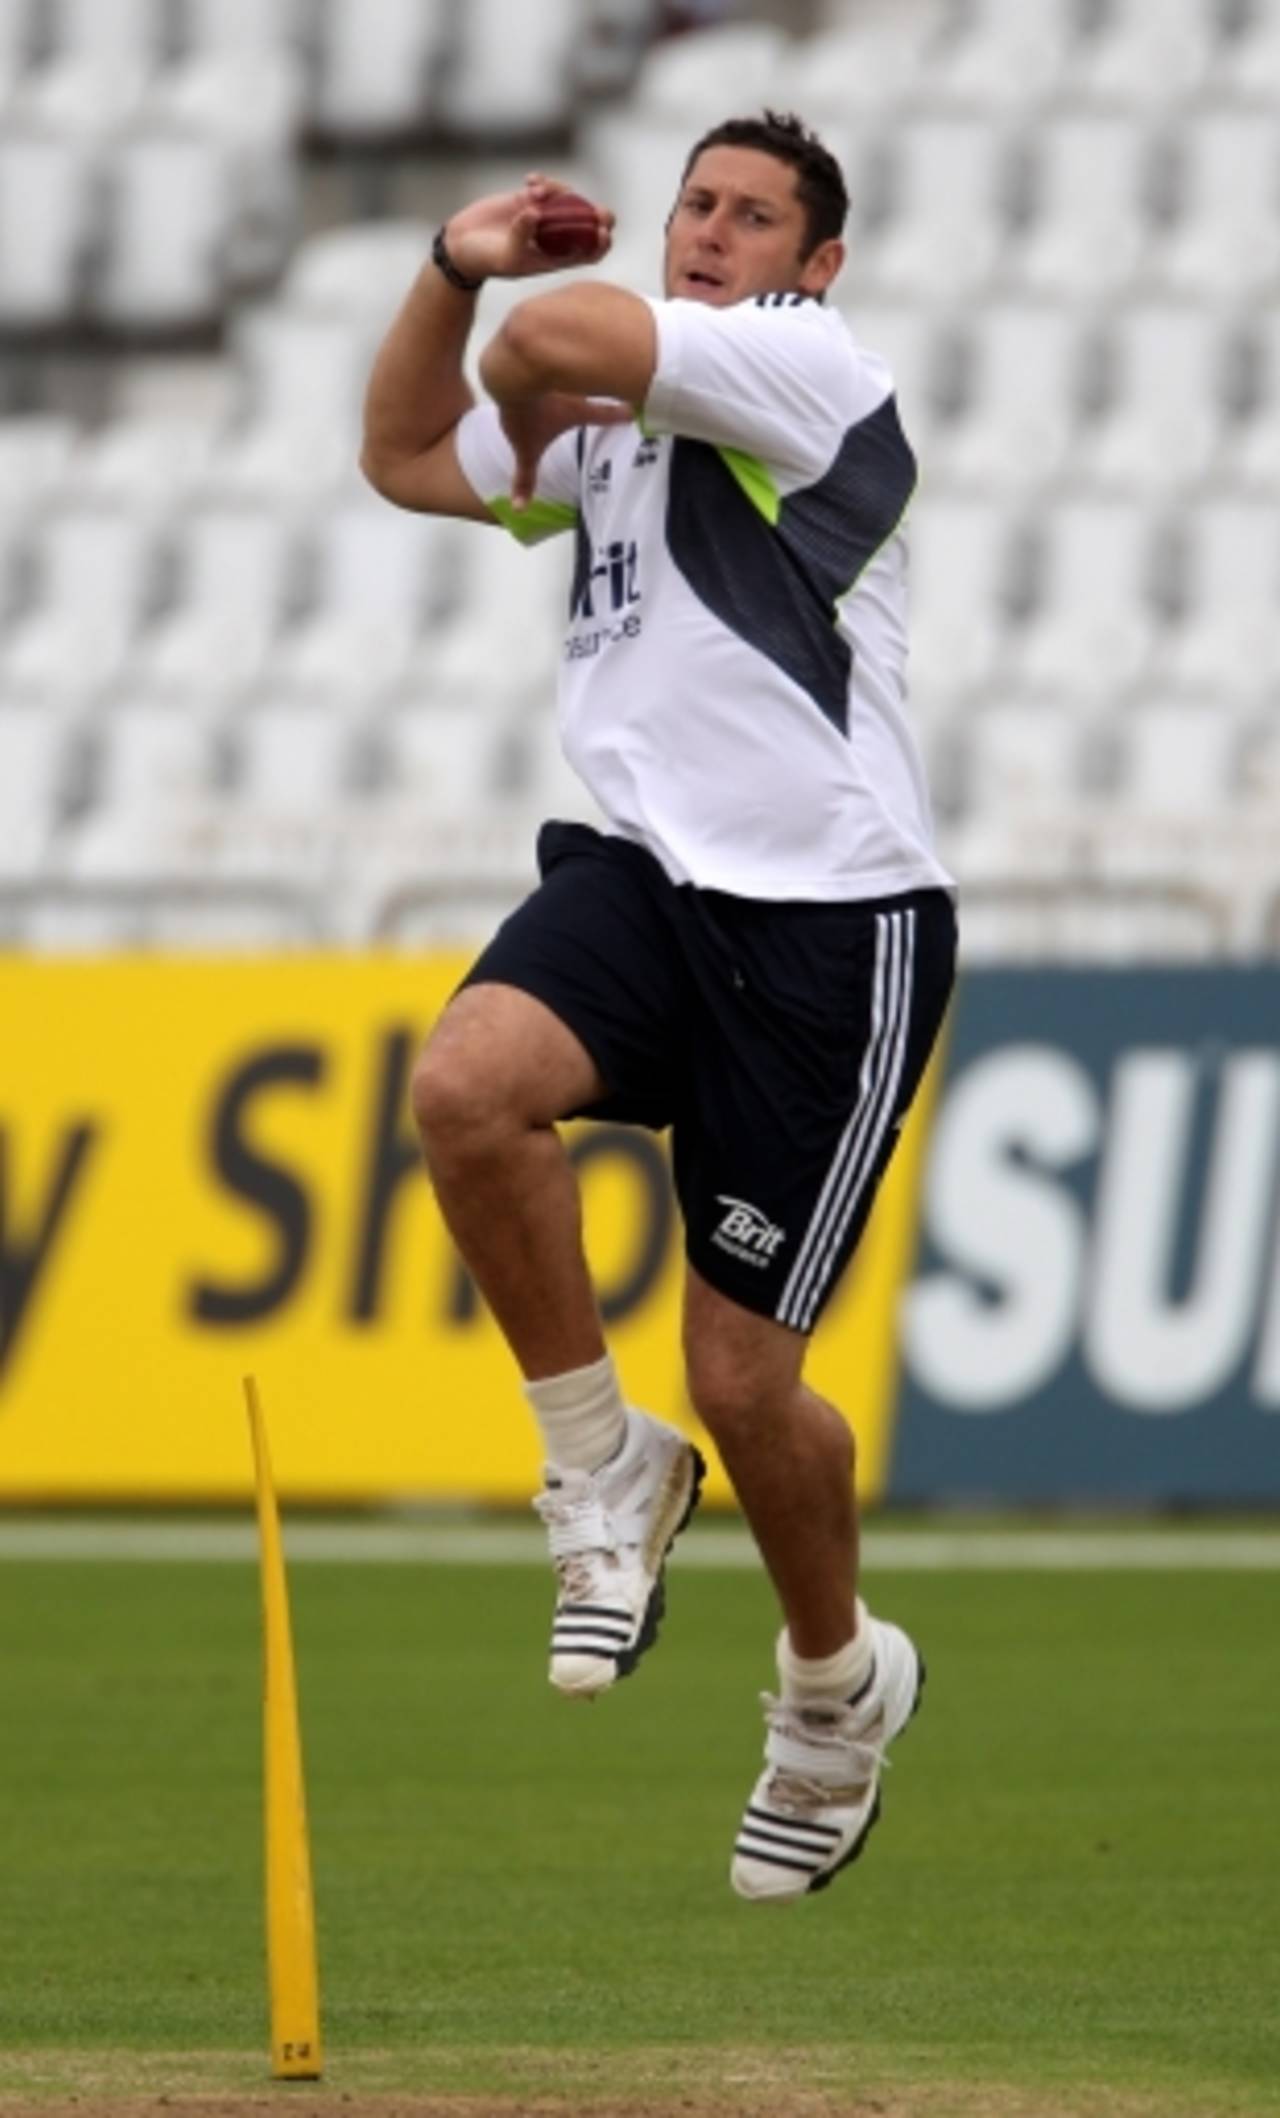 A re-called Tim Bresnan bowls during England's net session at Trent Bridge, July 28, 2010